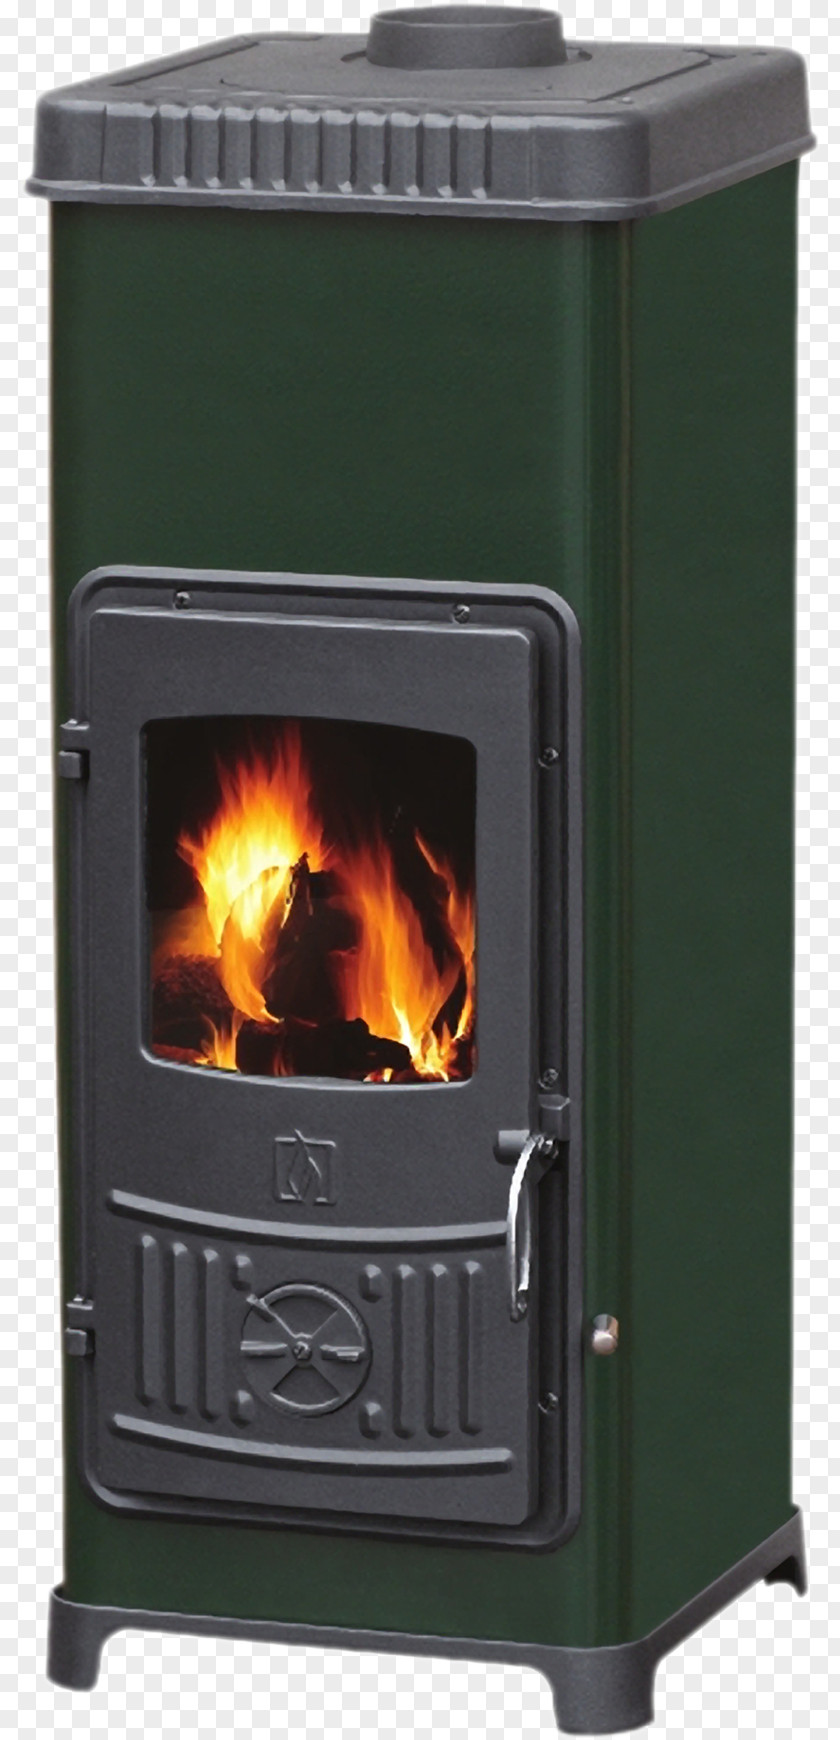 Stove Flame Firebox Green Color Oven PNG